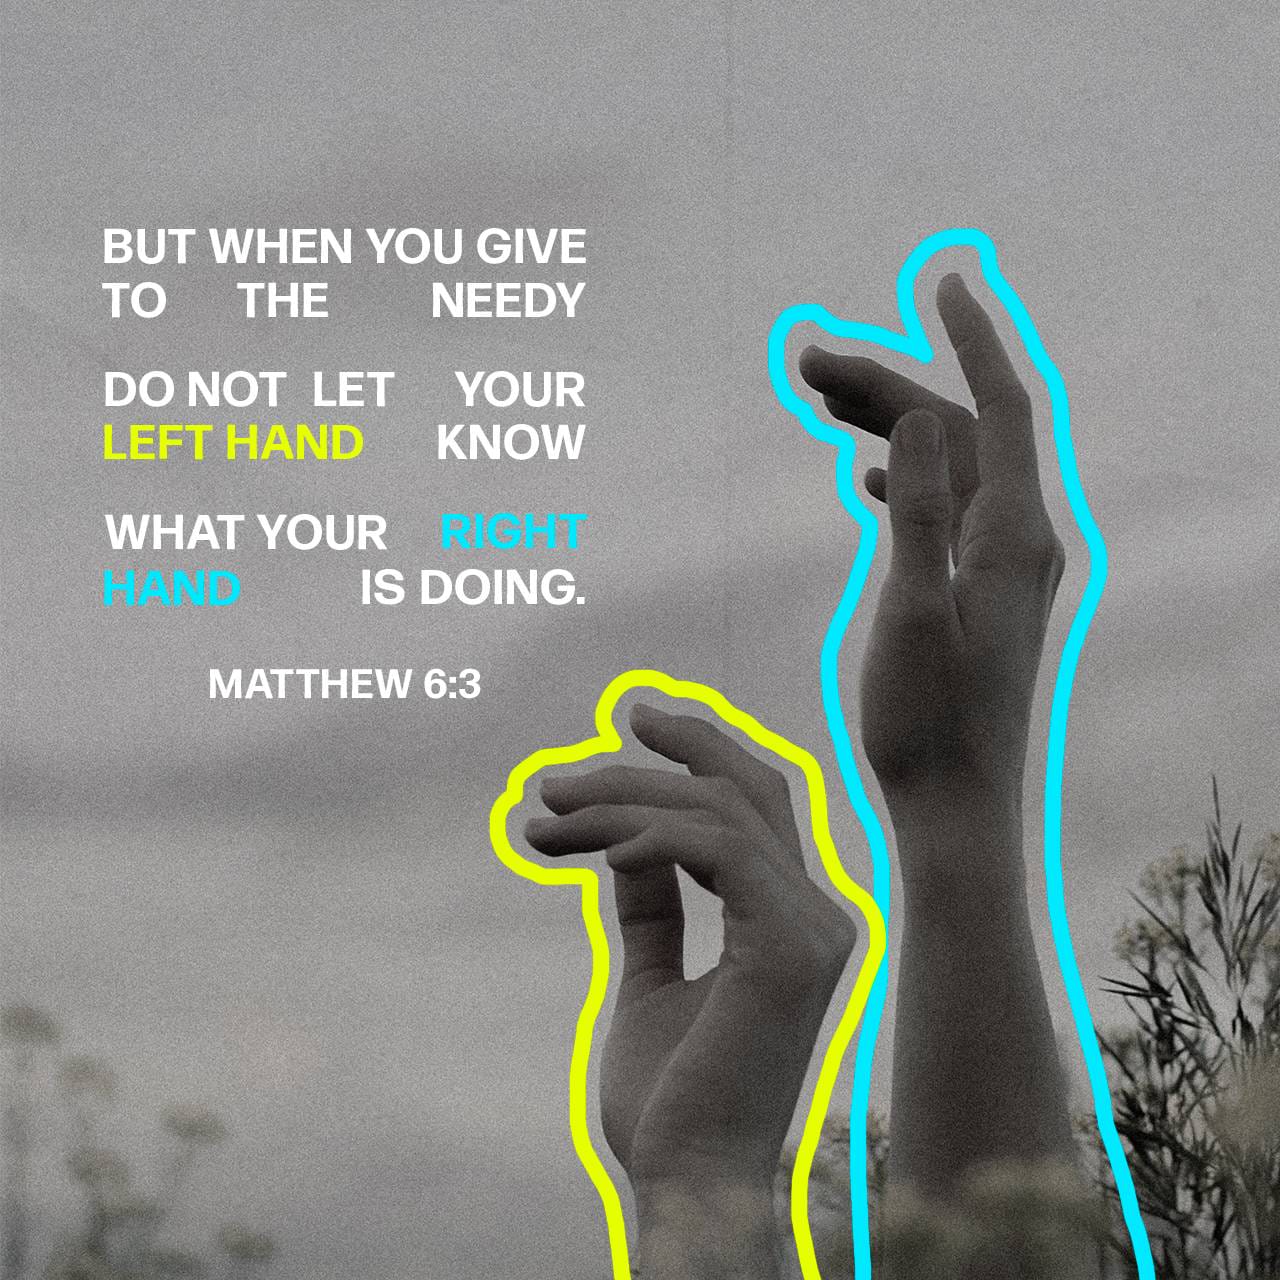 Matthew 6:3-4 But when you give to the needy, do not let your left